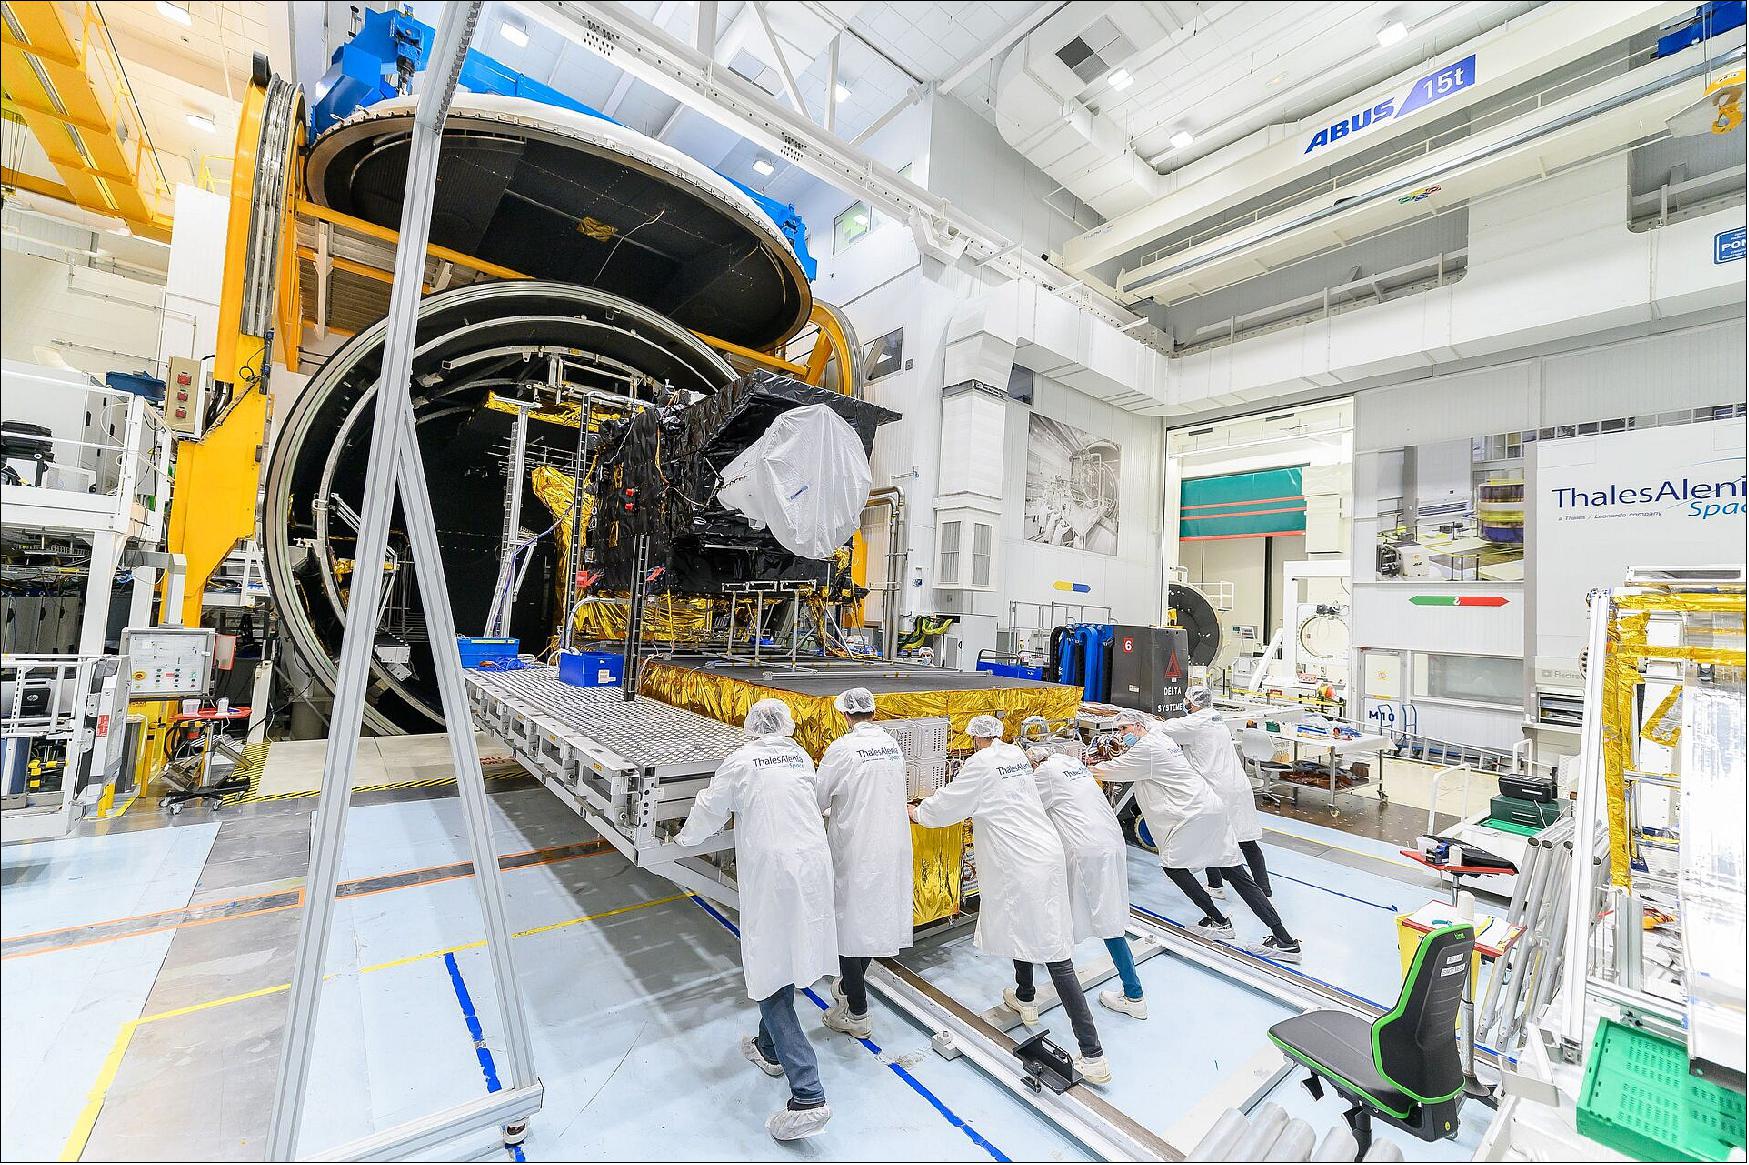 Figure 13: The Meteosat Third Generation Imager satellite being pushed into the thermal vacuum chamber for testing at Thales Alenia Space’s facilities in Cannes, France, in October 2021. These tests simulate the thermal conditions that the satellite will experience in orbit above Earth and demonstrate that the satellite will function correctly in the harsh environment of space. To meet more than the 20-year operational life of the mission, the full MTG system comprises six satellites, four MTG-I and two MTG-S. The first MTG-I is scheduled to launch at the end of 2022 (image credit: Thales Alenia Space)